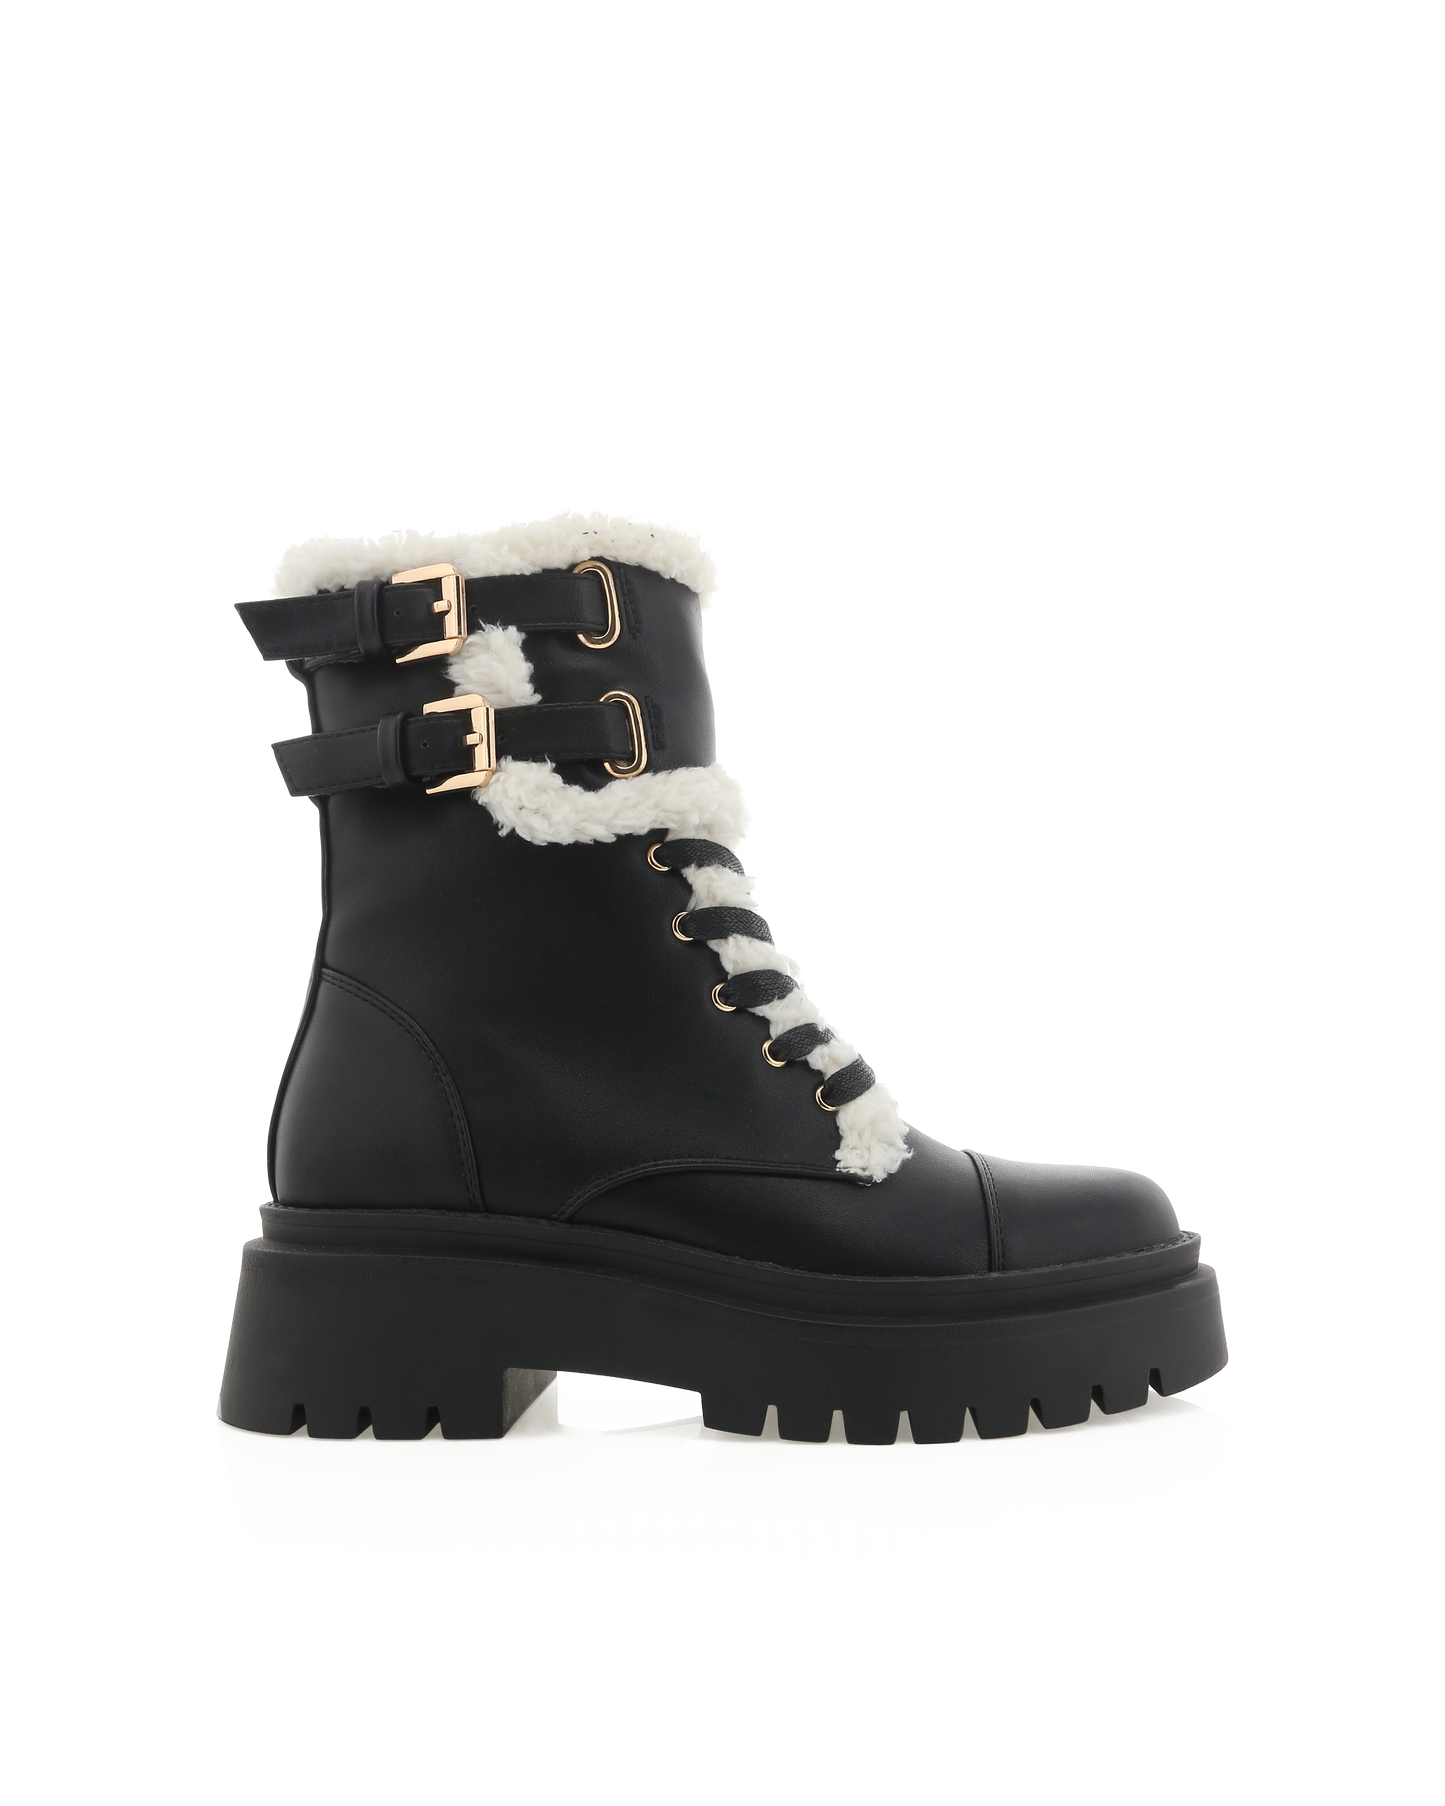 Womens Black Combat Boot With Shearling Lining and a double buckle.feature at the ankle. Gold detailing.